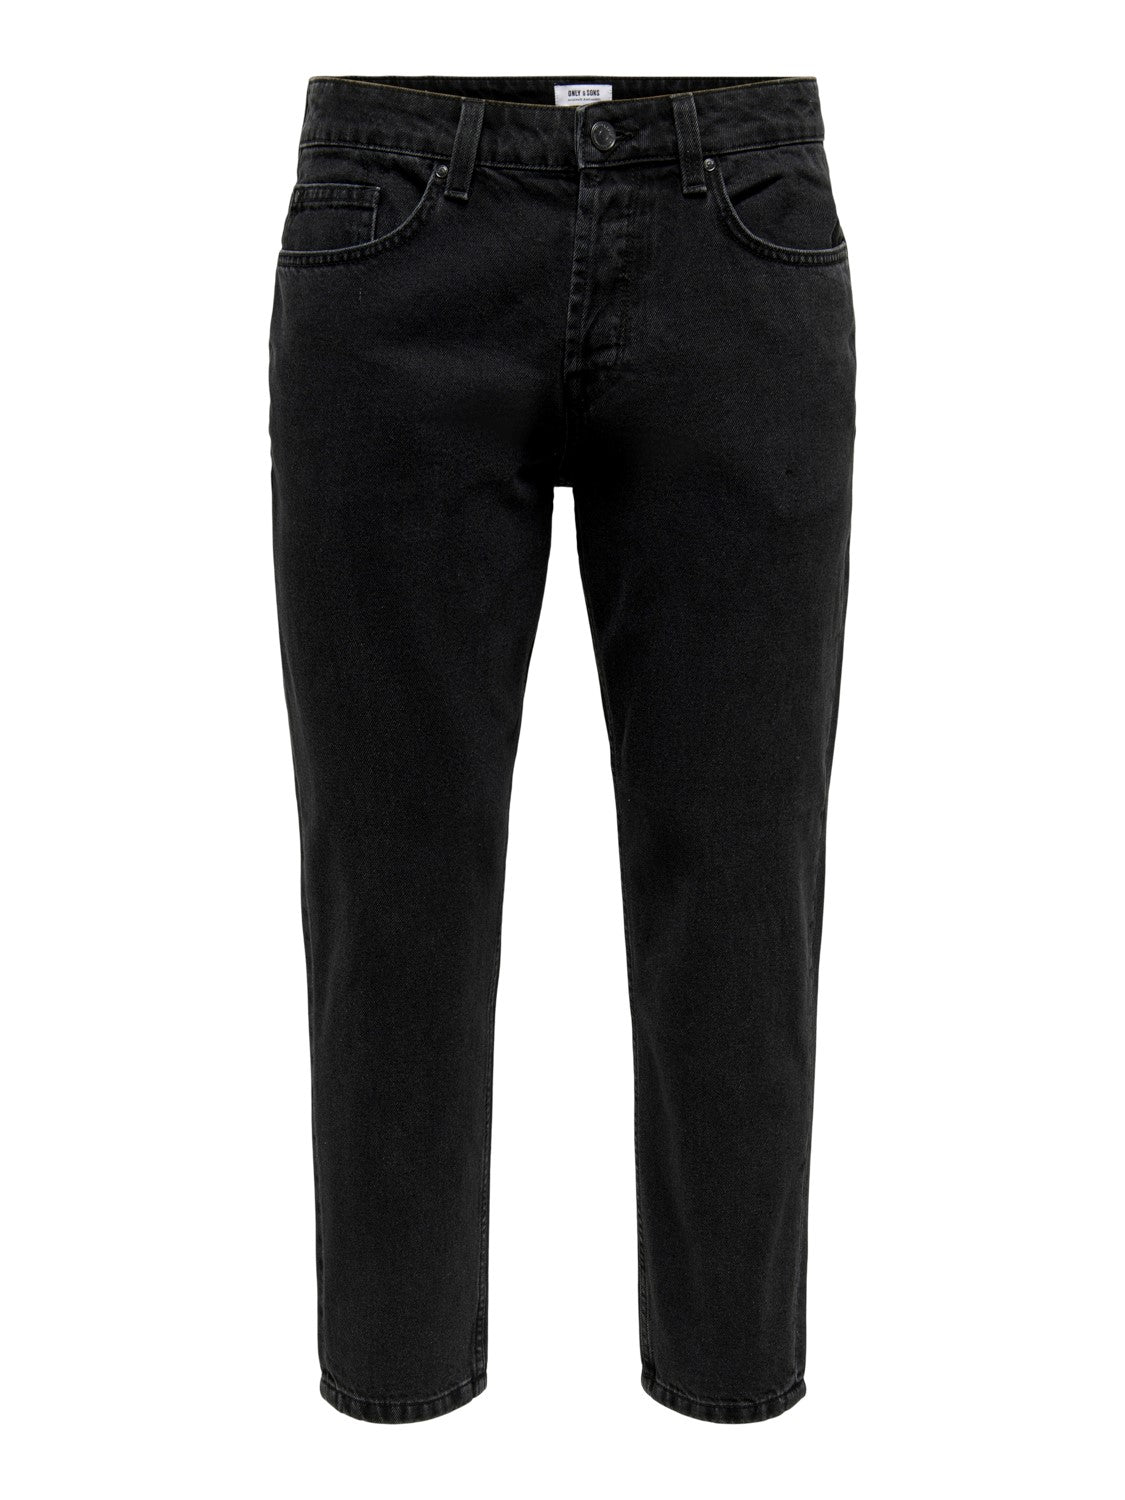 CARROT & CROPPED BLACK JEANS